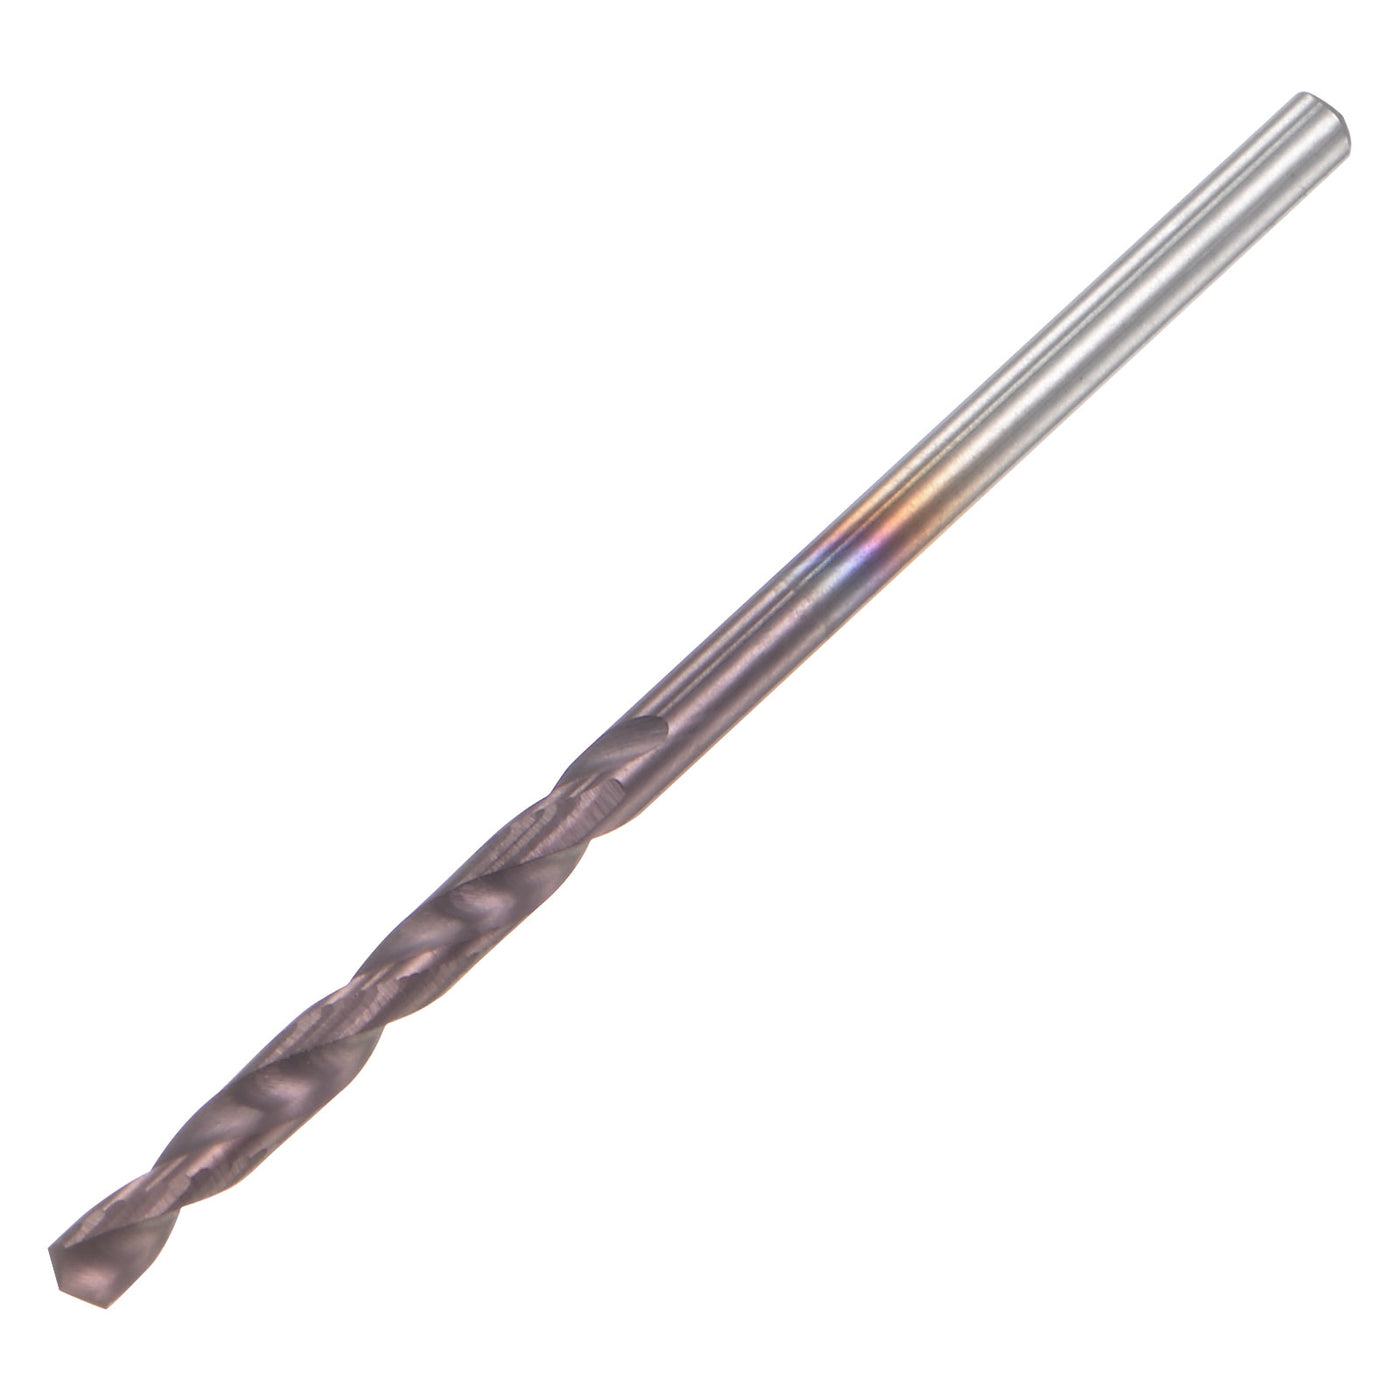 uxcell Uxcell 1.8mm DIN K45 Tungsten Carbide AlTiSin Coated Drill Bit for Stainless Steel